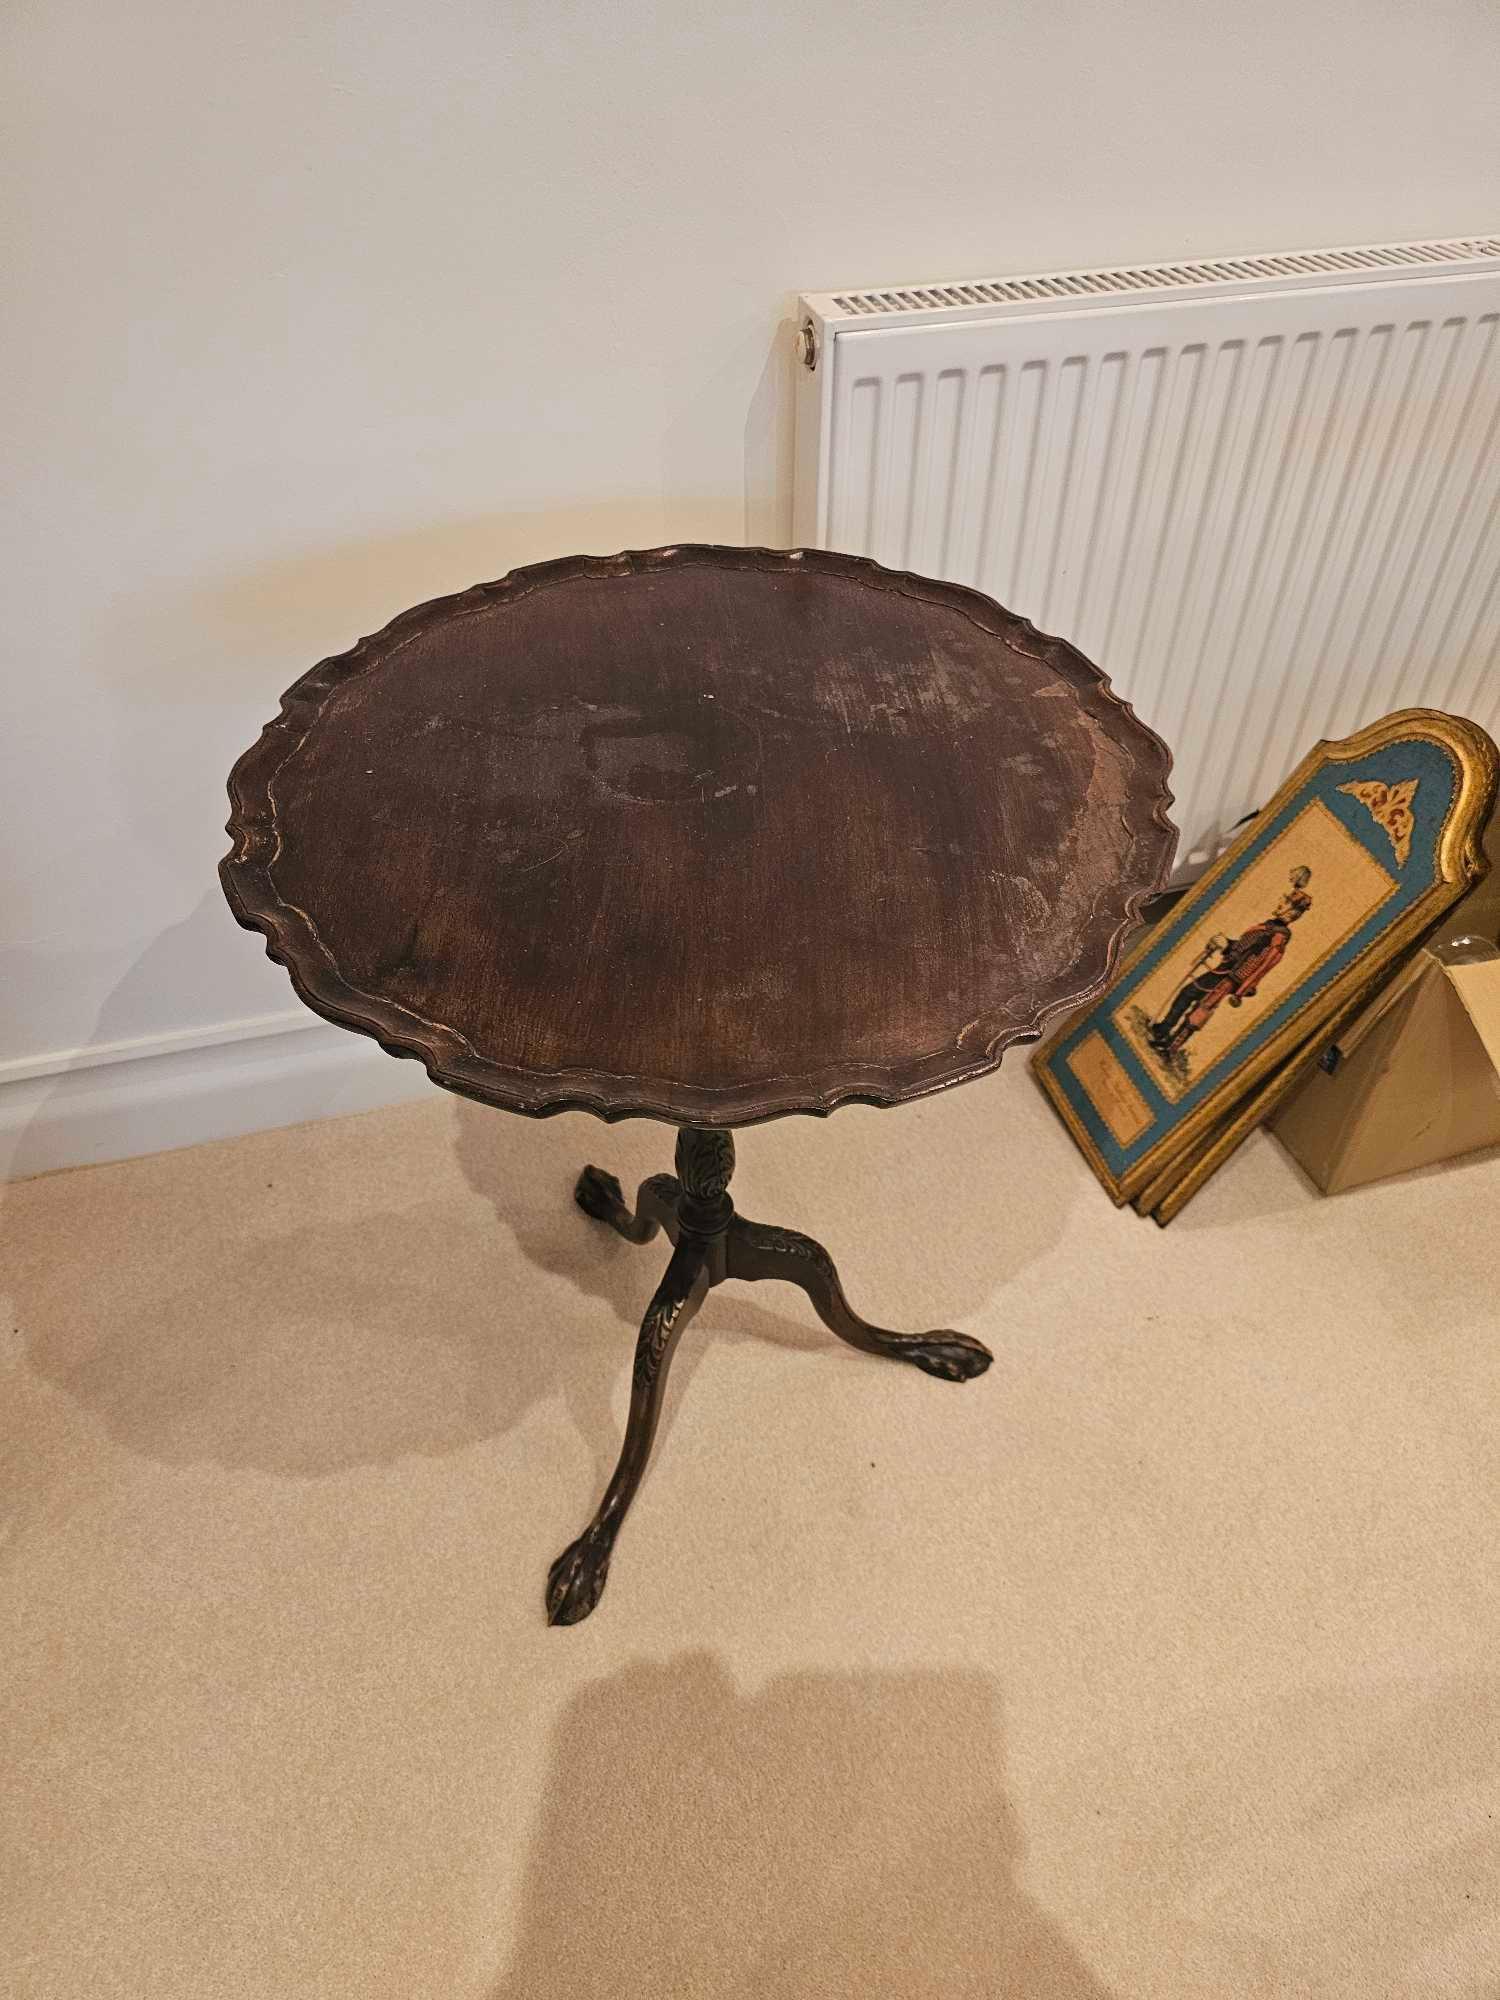 Chippendale Style Mahogany Tilt Top Table A Shaped Pie Crust Edge And Sits On A Well Turned Baluster - Image 3 of 7